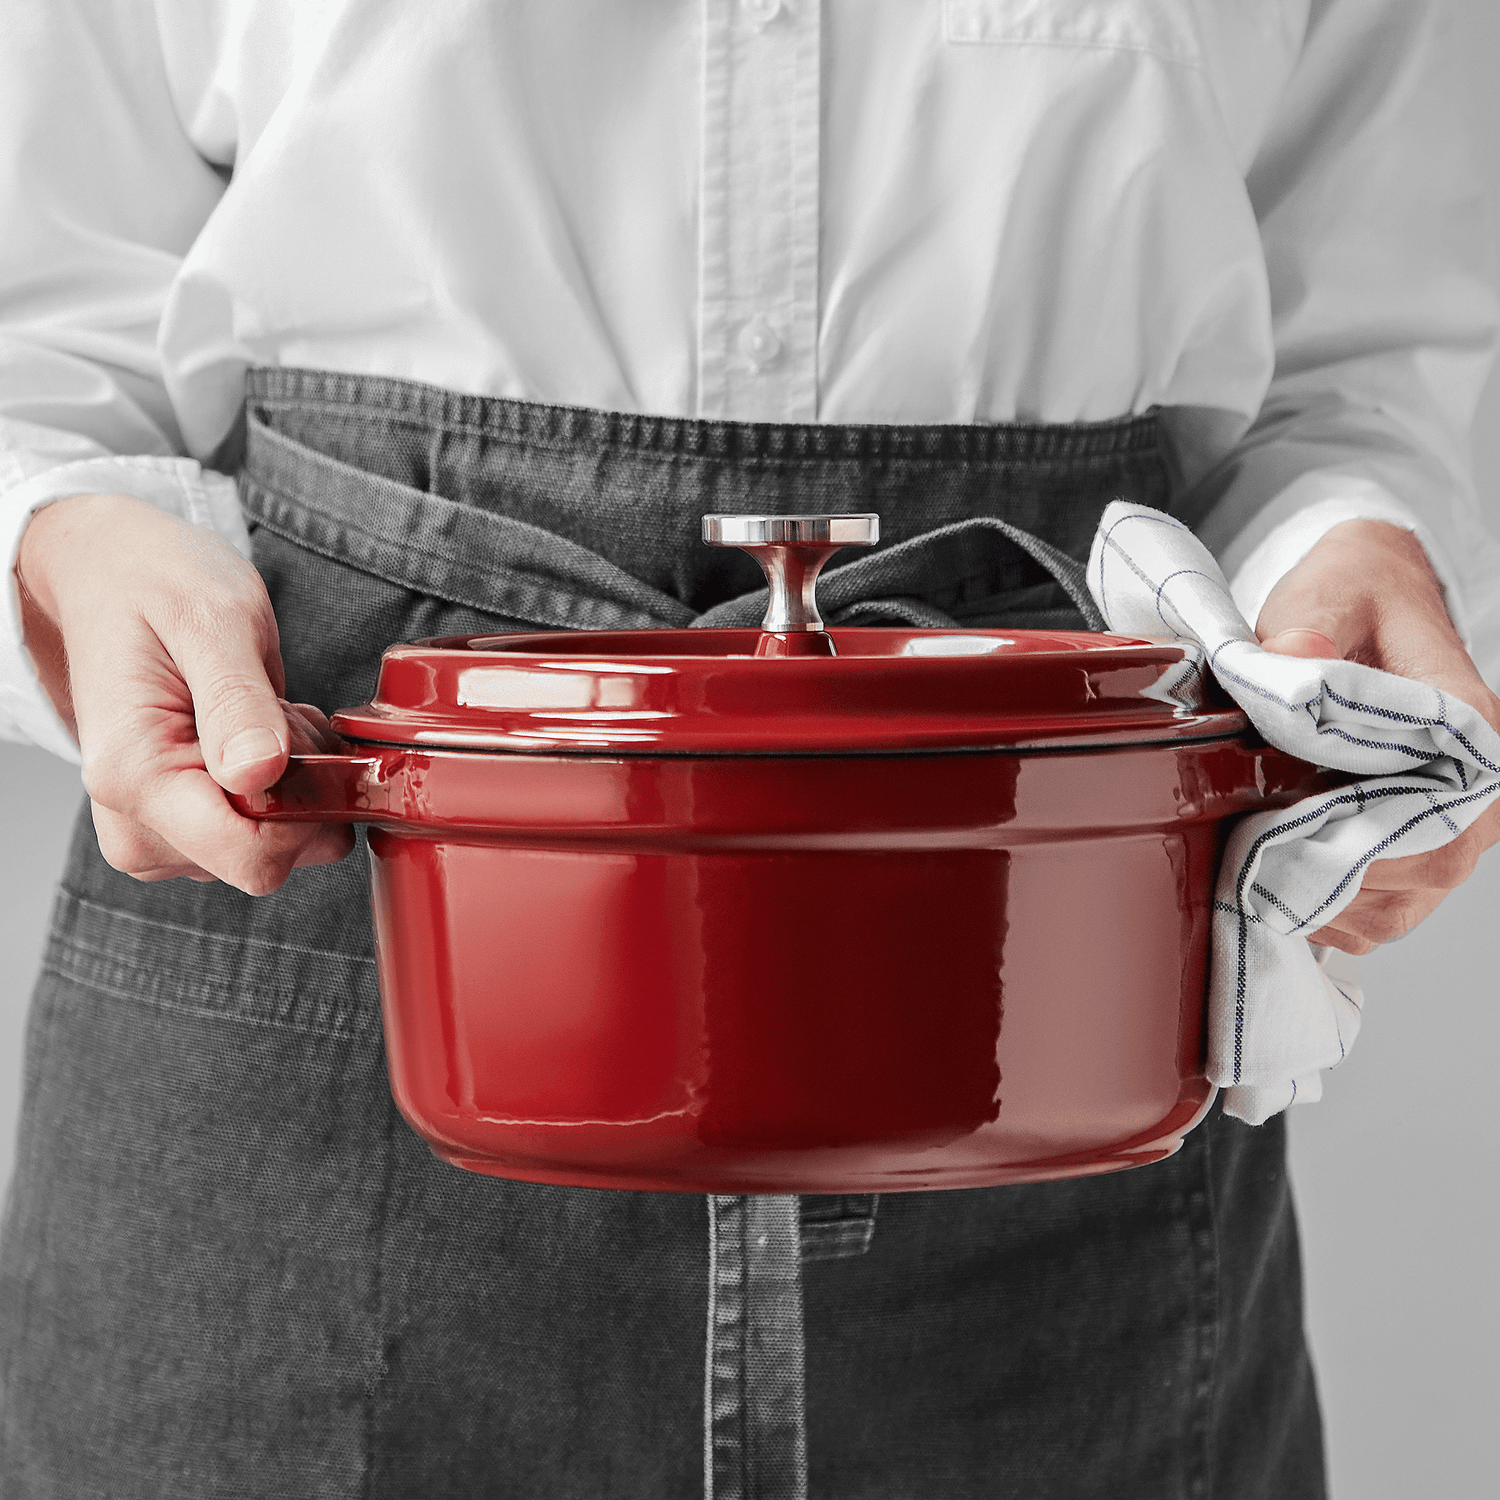 Le Chef 21 Piece Enameled Cast Iron Cookware Set in Cherry